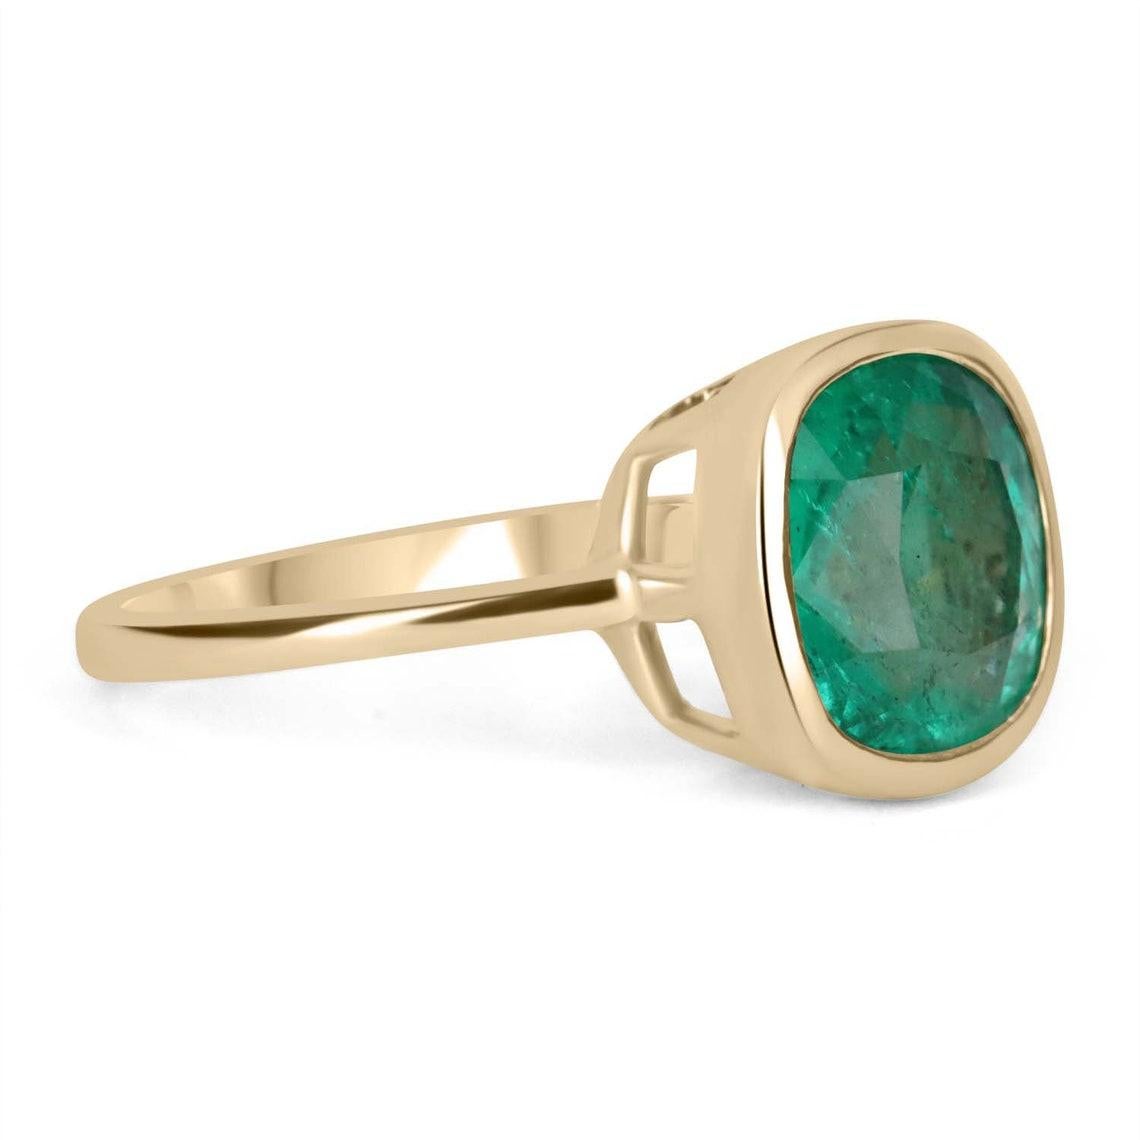 Displayed is a bespoke Colombian emerald solitaire cushion-cut engagement/right-hand ring in 18K yellow gold. This gorgeous solitaire ring carries a 3.40-carat emerald in a bezel setting. Fully faceted, this gemstone showcases excellent shine. The